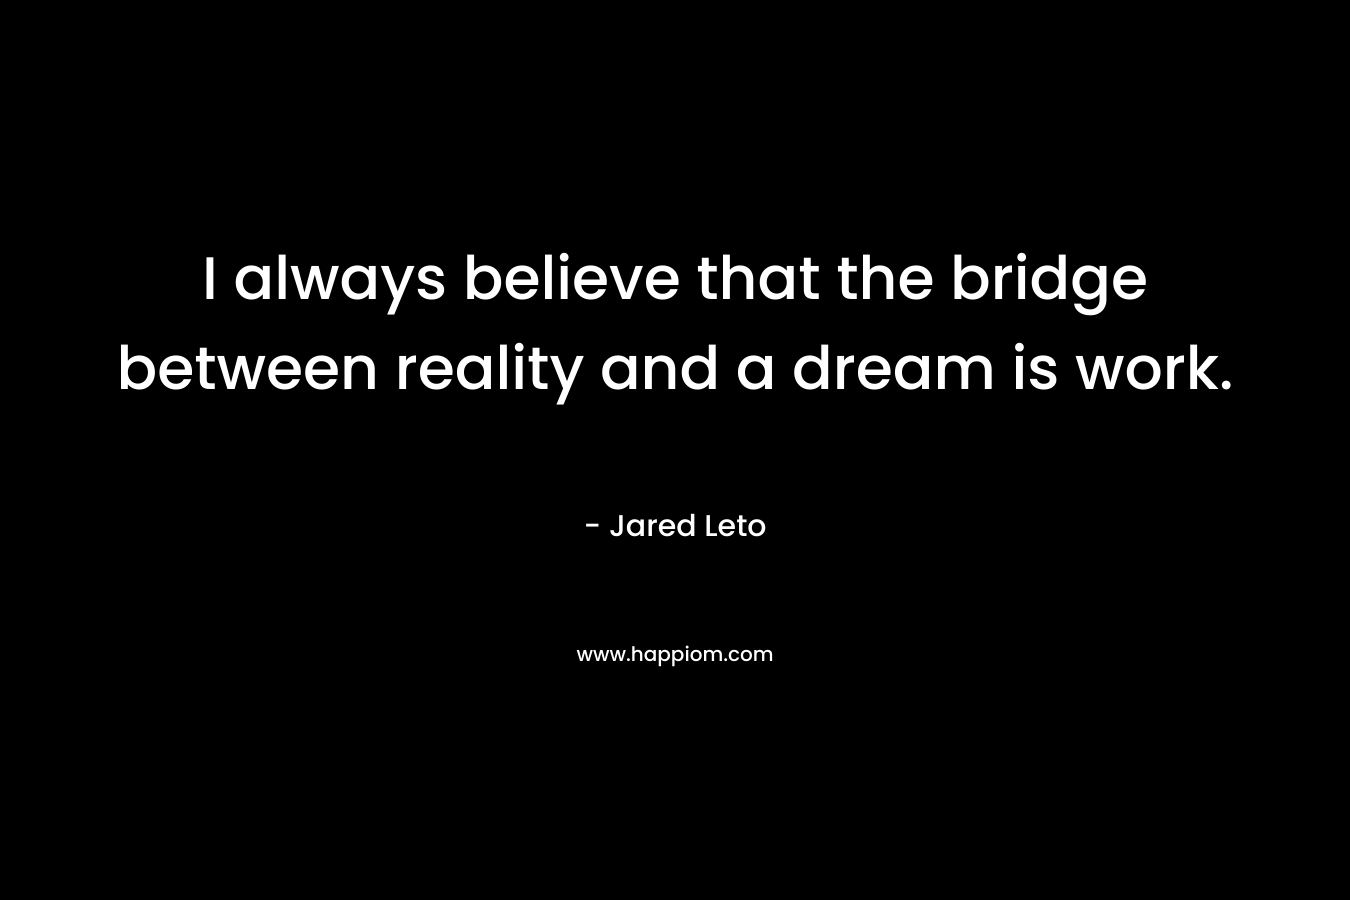 I always believe that the bridge between reality and a dream is work. – Jared Leto